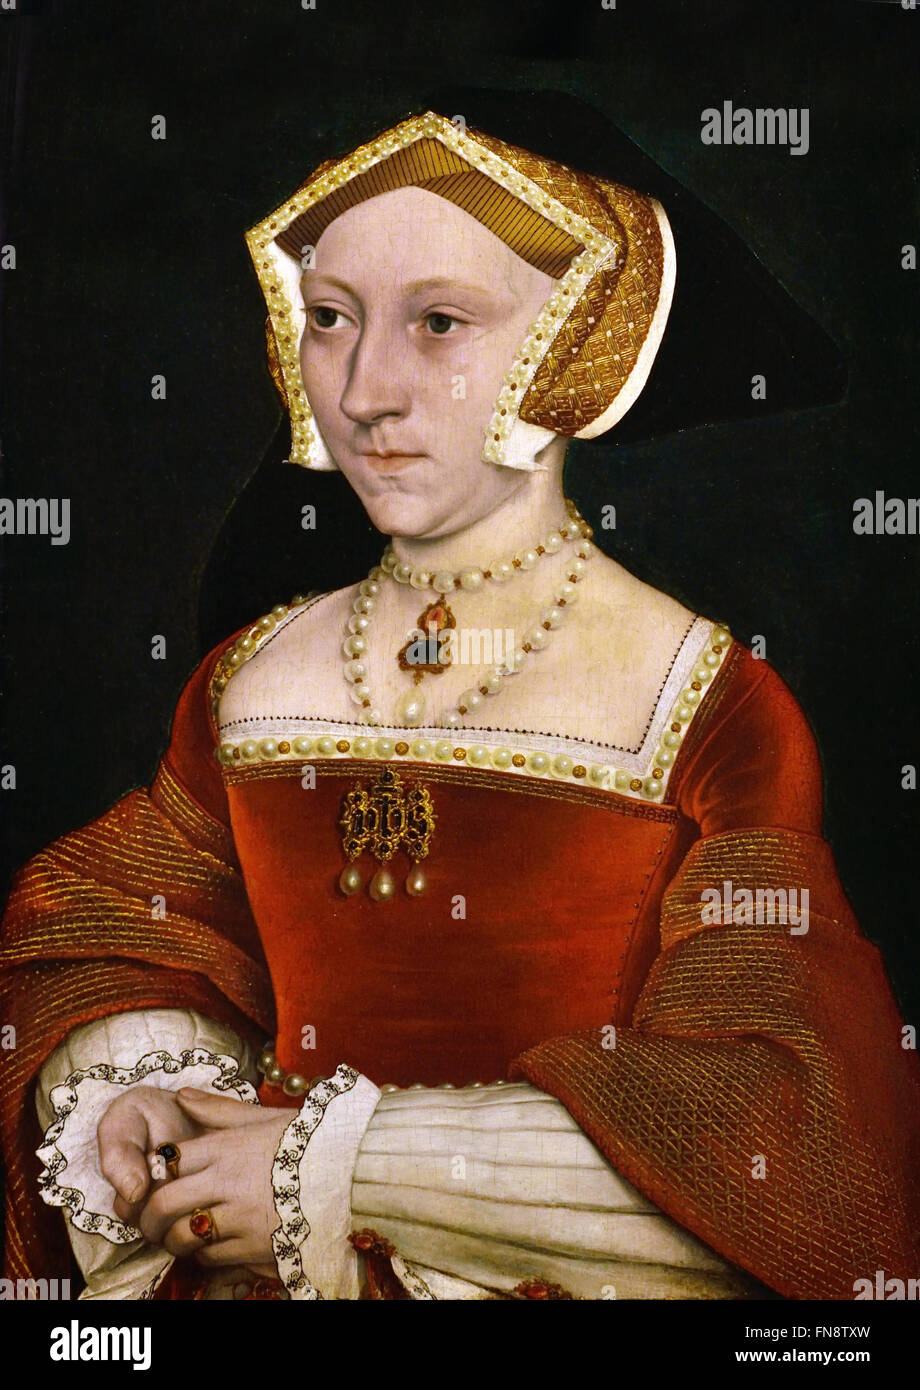 Portrait of Jane Seymour (1509-1537) 1540 Hans Holbein the Younger   1497 - 1543  German Germany ( Jane Seymour was the third wife of the English king Henry VIII ) Stock Photo